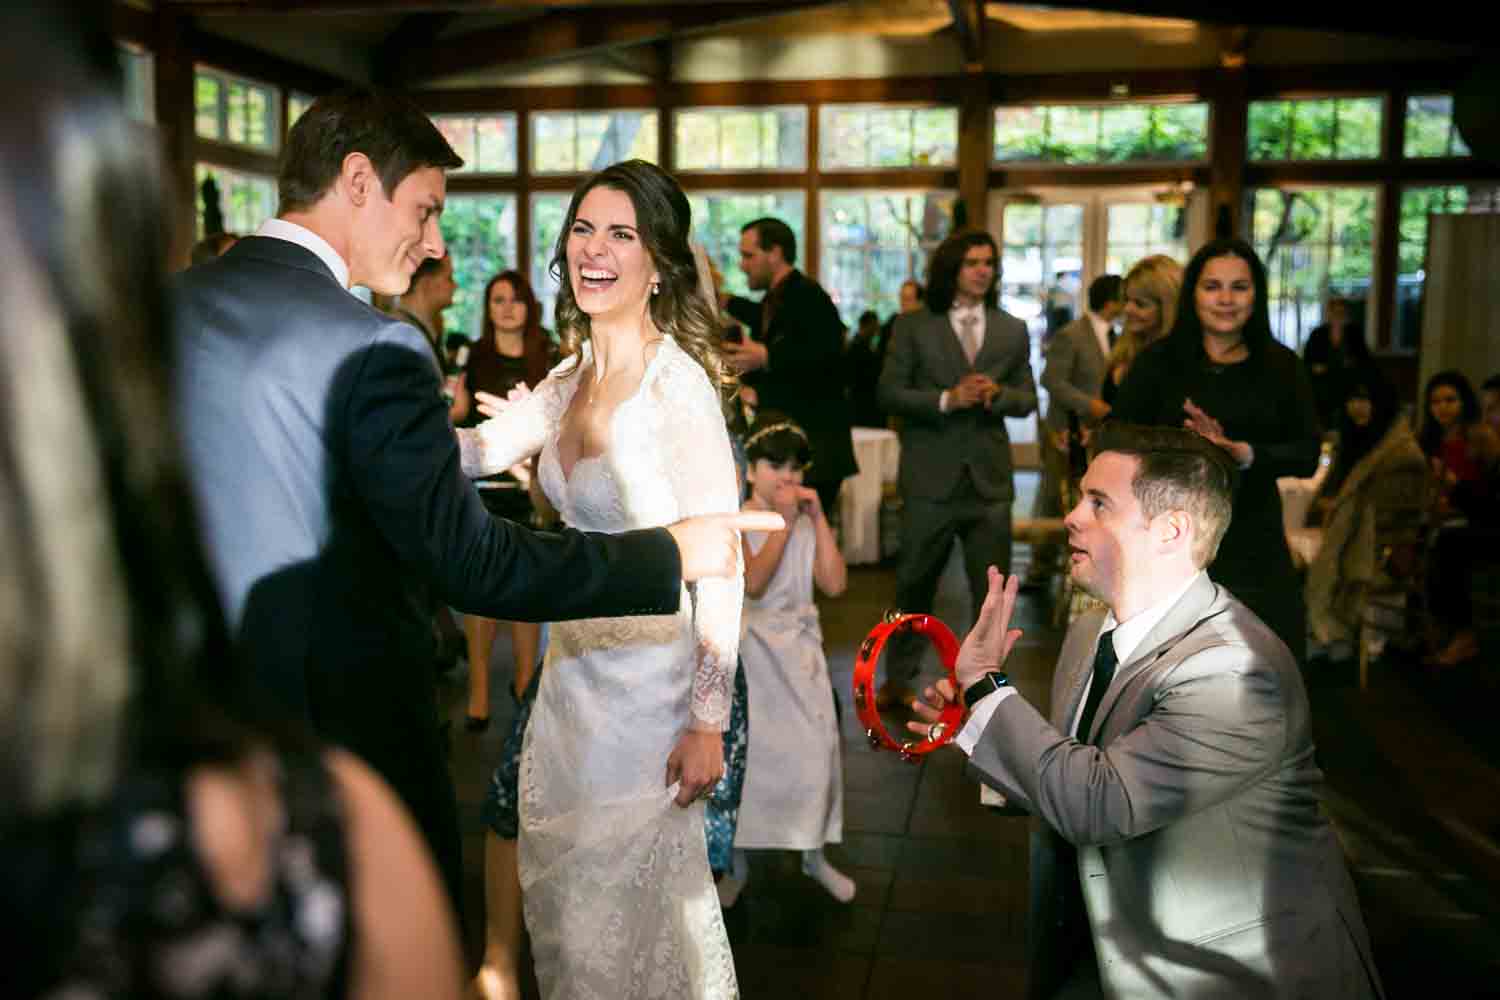 Bride and groom with guest on his knees playing a tambourine